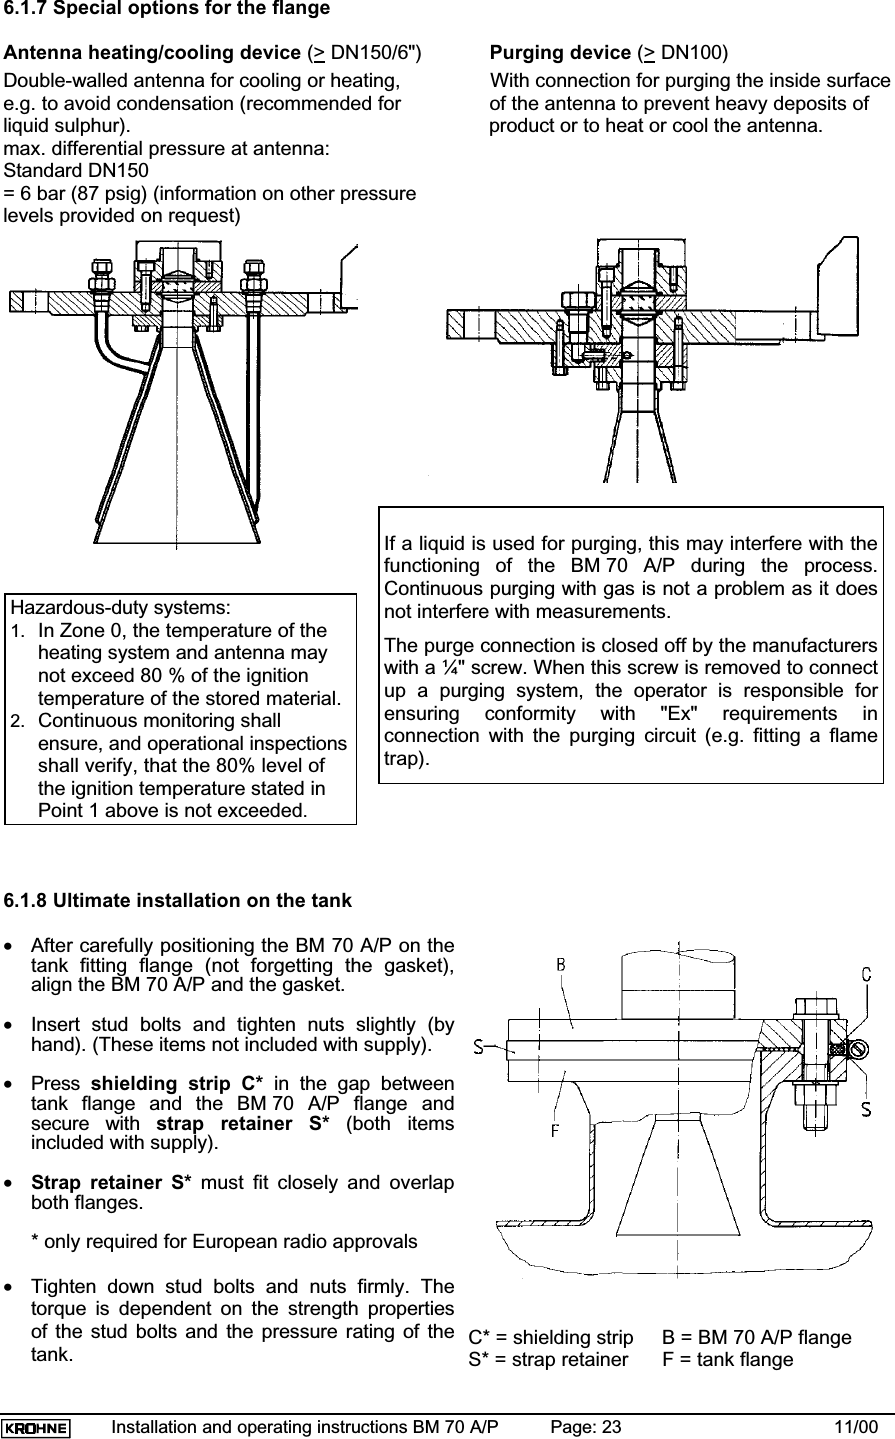 Installation and operating instructions BM 70 A/P Page: 23 11/006.1.7 Special options for the flangeAntenna heating/cooling device (&gt; DN150/6&quot;) Purging device (&gt; DN100)Double-walled antenna for cooling or heating, With connection for purging the inside surfacee.g. to avoid condensation (recommended for of the antenna to prevent heavy deposits ofliquid sulphur). product or to heat or cool the antenna.max. differential pressure at antenna:Standard DN150= 6 bar (87 psig) (information on other pressurelevels provided on request)6.1.8 Ultimate installation on the tank•After carefully positioning the BM 70 A/P on thetank fitting flange (not forgetting the gasket),align the BM 70 A/P and the gasket.•Insert stud bolts and tighten nuts slightly (byhand). (These items not included with supply).•Press shielding strip C* in the gap betweentank flange and the BM 70 A/P flange andsecure with strap retainer S* (both itemsincluded with supply).•Strap retainer S* must fit closely and overlapboth flanges.* only required for European radio approvals•Tighten down stud bolts and nuts firmly. Thetorque is dependent on the strength propertiesof the stud bolts and the pressure rating of thetank. C* = shielding strip     B = BM 70 A/P flangeS* = strap retainer      F = tank flangeIf a liquid is used for purging, this may interfere with thefunctioning of the BM 70 A/P during the process.Continuous purging with gas is not a problem as it doesnot interfere with measurements.The purge connection is closed off by the manufacturerswith a ¼&quot; screw. When this screw is removed to connectup a purging system, the operator is responsible forensuring conformity with &quot;Ex&quot; requirements inconnection with the purging circuit (e.g. fitting a flametrap).Hazardous-duty systems:1. In Zone 0, the temperature of theheating system and antenna maynot exceed 80 % of the ignitiontemperature of the stored material.2. Continuous monitoring shallensure, and operational inspectionsshall verify, that the 80% level ofthe ignition temperature stated inPoint 1 above is not exceeded.